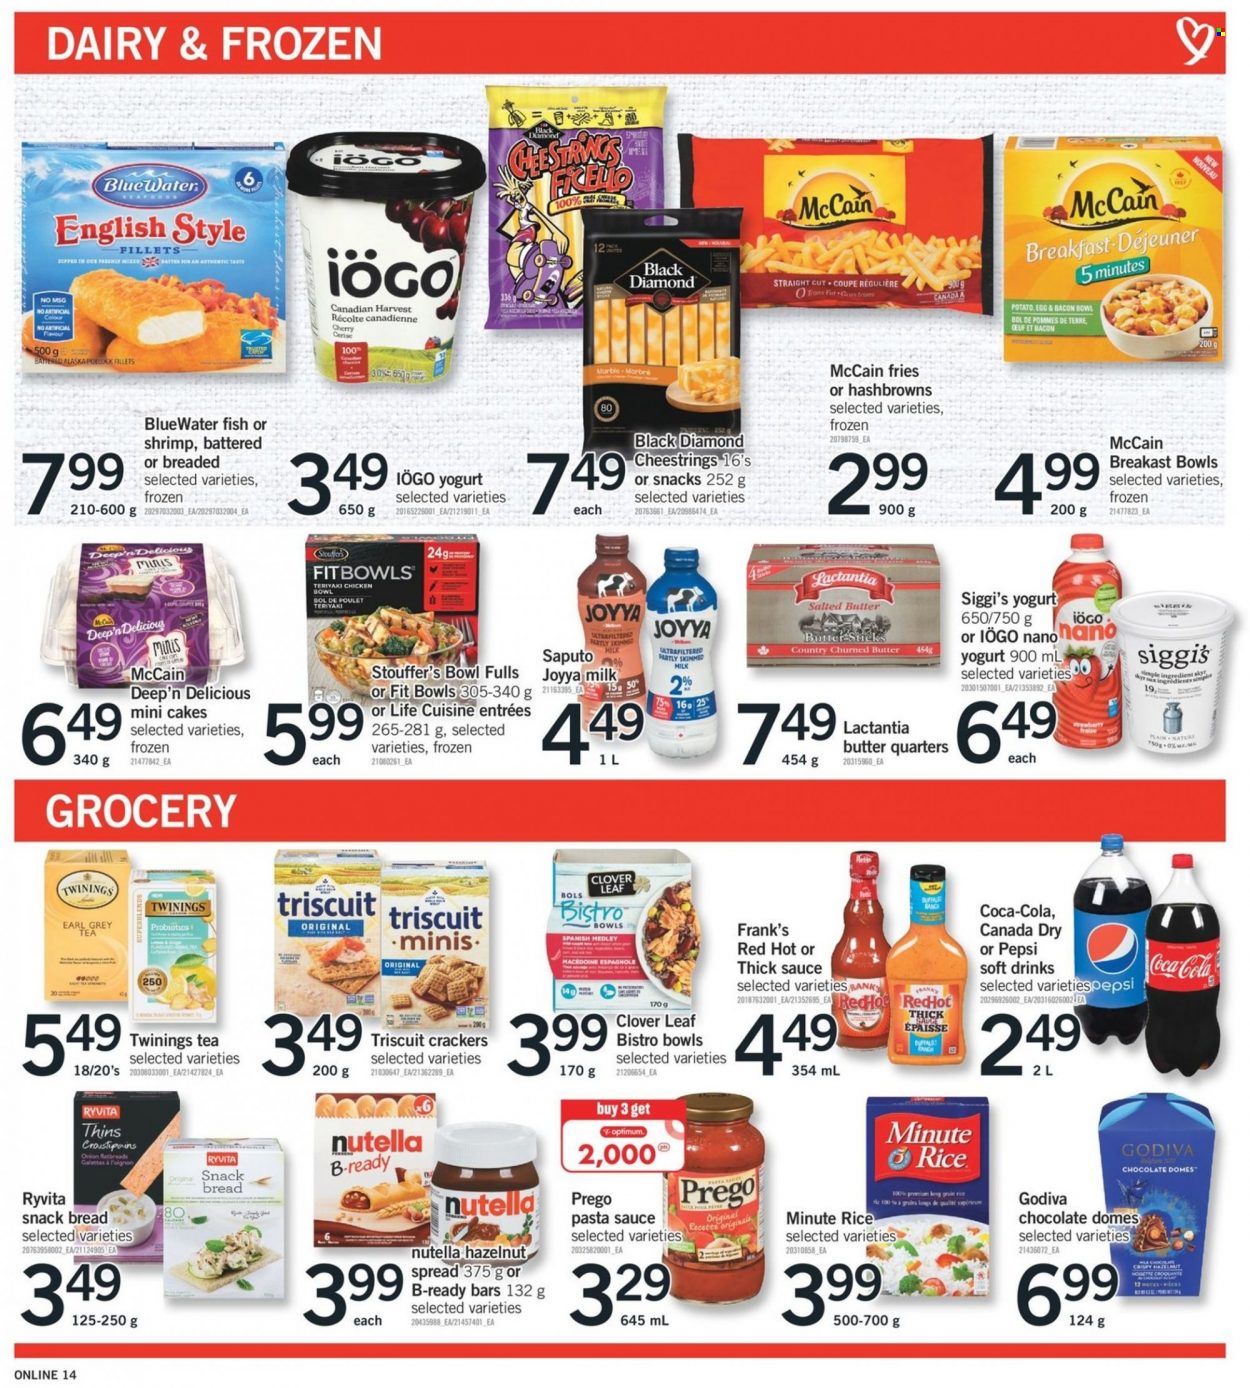 thumbnail - Fortinos Flyer - January 26, 2023 - February 01, 2023 - Sales products - bread, cake, onion, cherries, pollock, fish, shrimps, pasta sauce, sauce, bacon, string cheese, yoghurt, Clover, milk, eggs, salted butter, Stouffer's, McCain, hash browns, potato fries, chocolate, Godiva, crackers, Thins, rice, long grain rice, hazelnut spread, Canada Dry, Coca-Cola, Pepsi, soft drink, tea, Twinings, Optimum, probiotics, Nutella. Page 14.